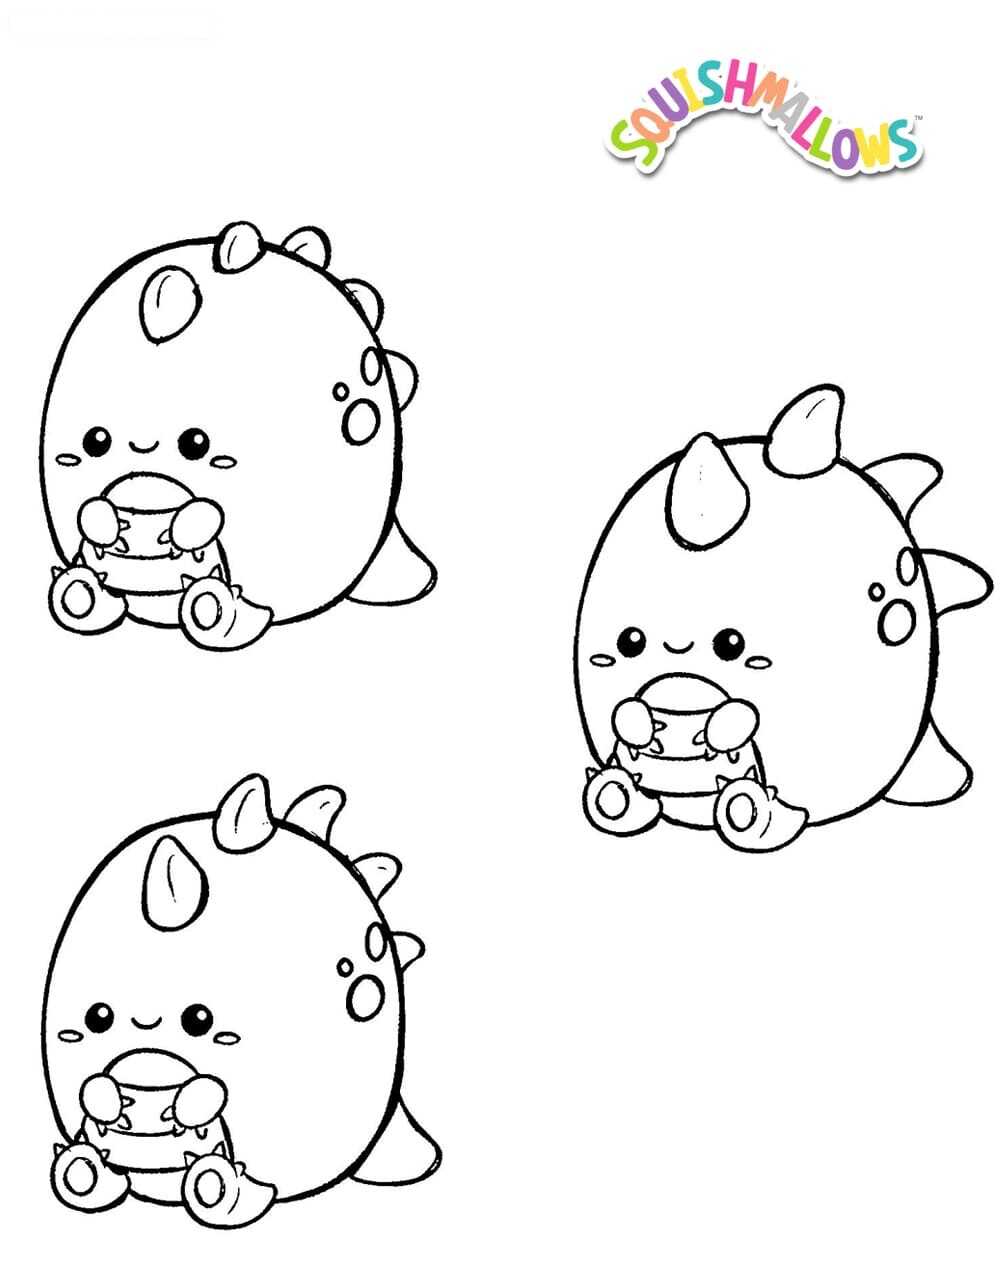 Free Printable Squishmallow Coloring Pages Squishmallow Coloring